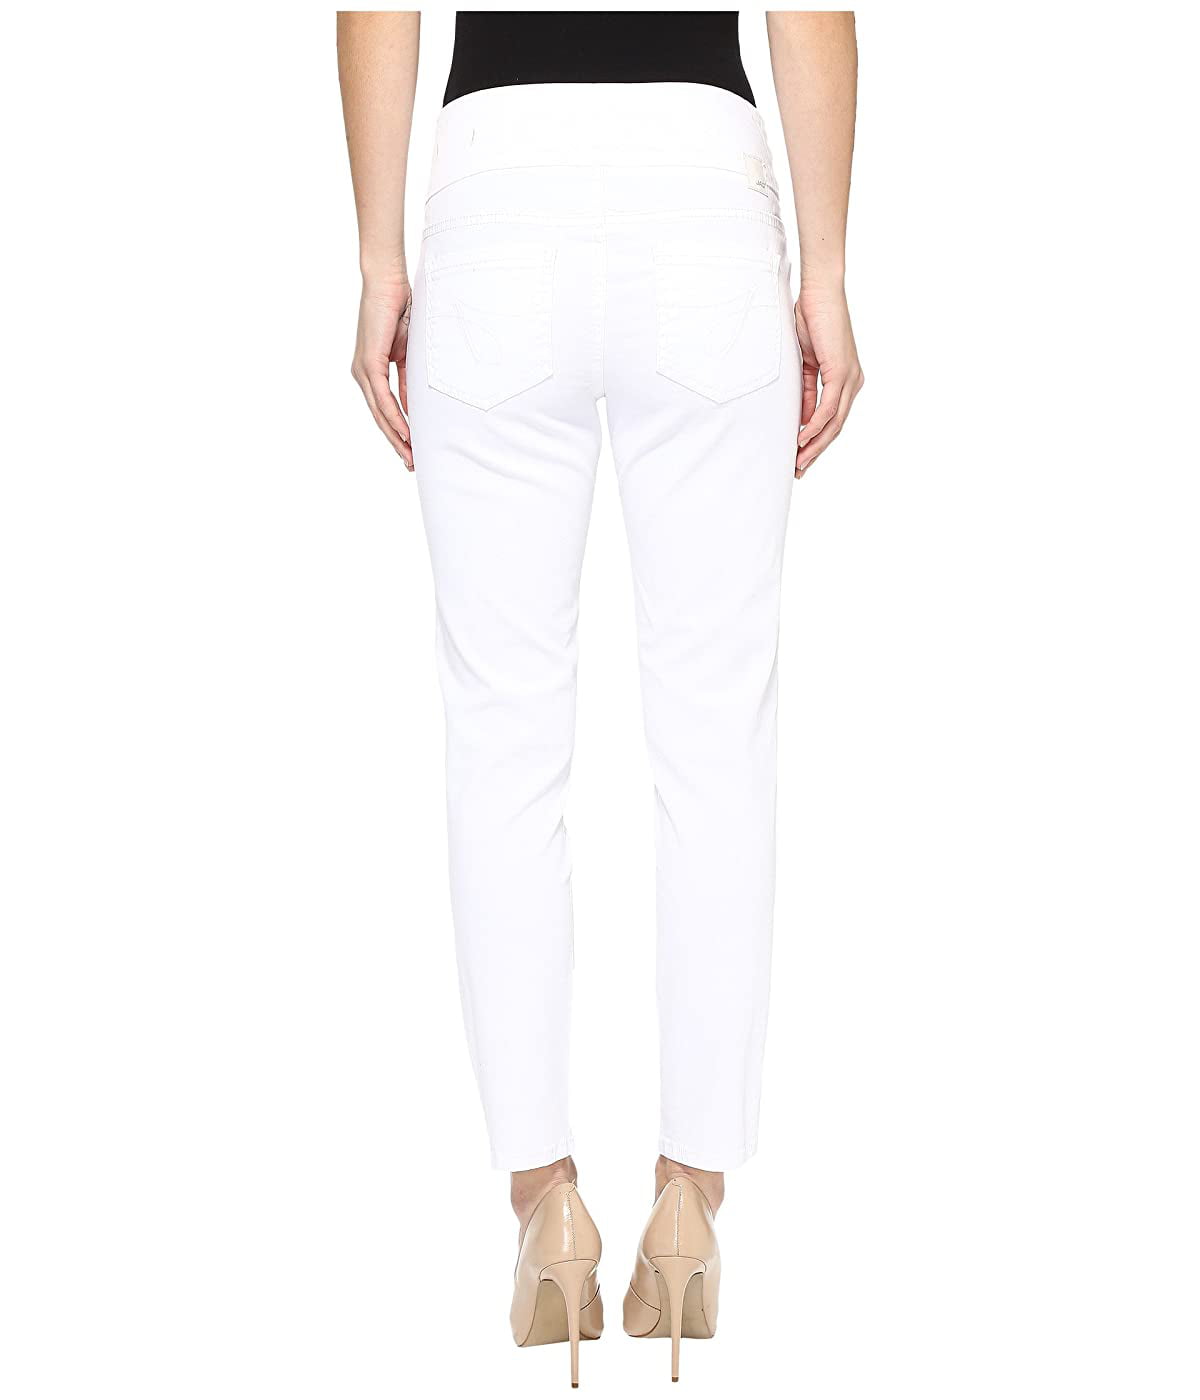 Jag Jeans Amelia Pull-On Slim Ankle Pants in Bay Twill White - Walmart.com